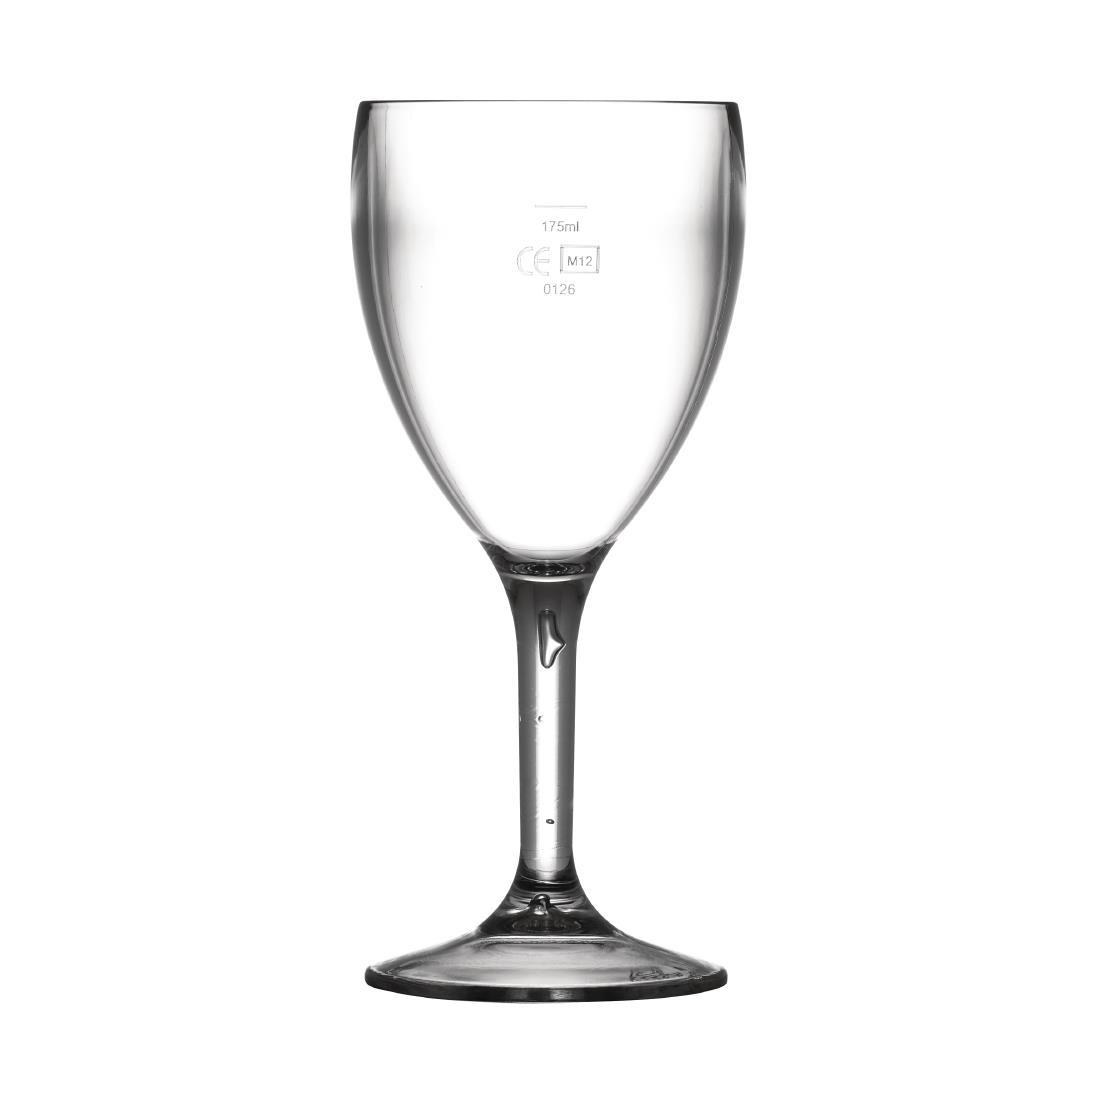 BBP Polycarbonate Wine Glasses 255ml CE Marked at 175ml (Pack of 12) - CG943  - 1